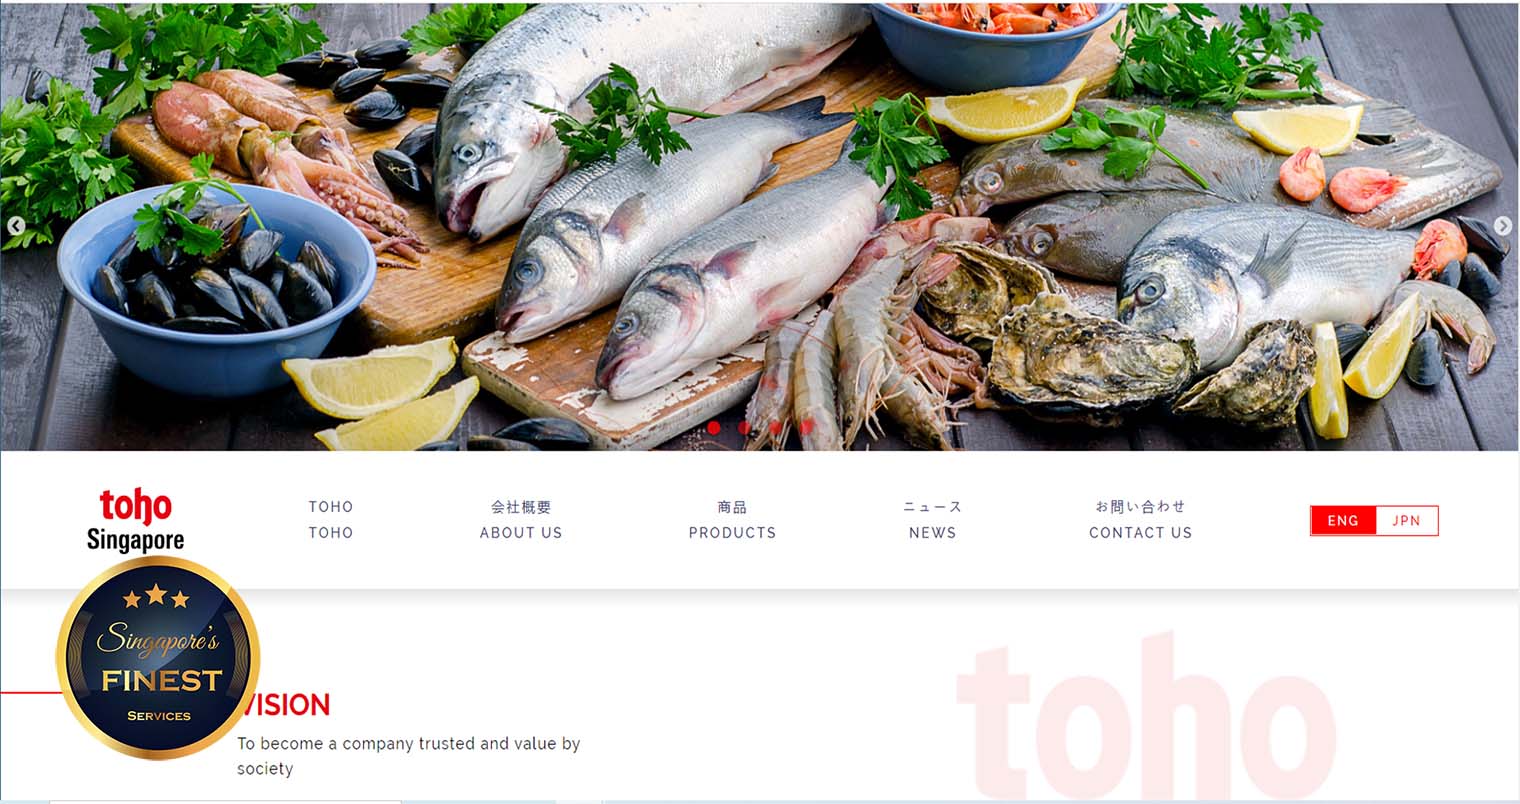 Toho - Wholesale Food Suppliers in Singapore